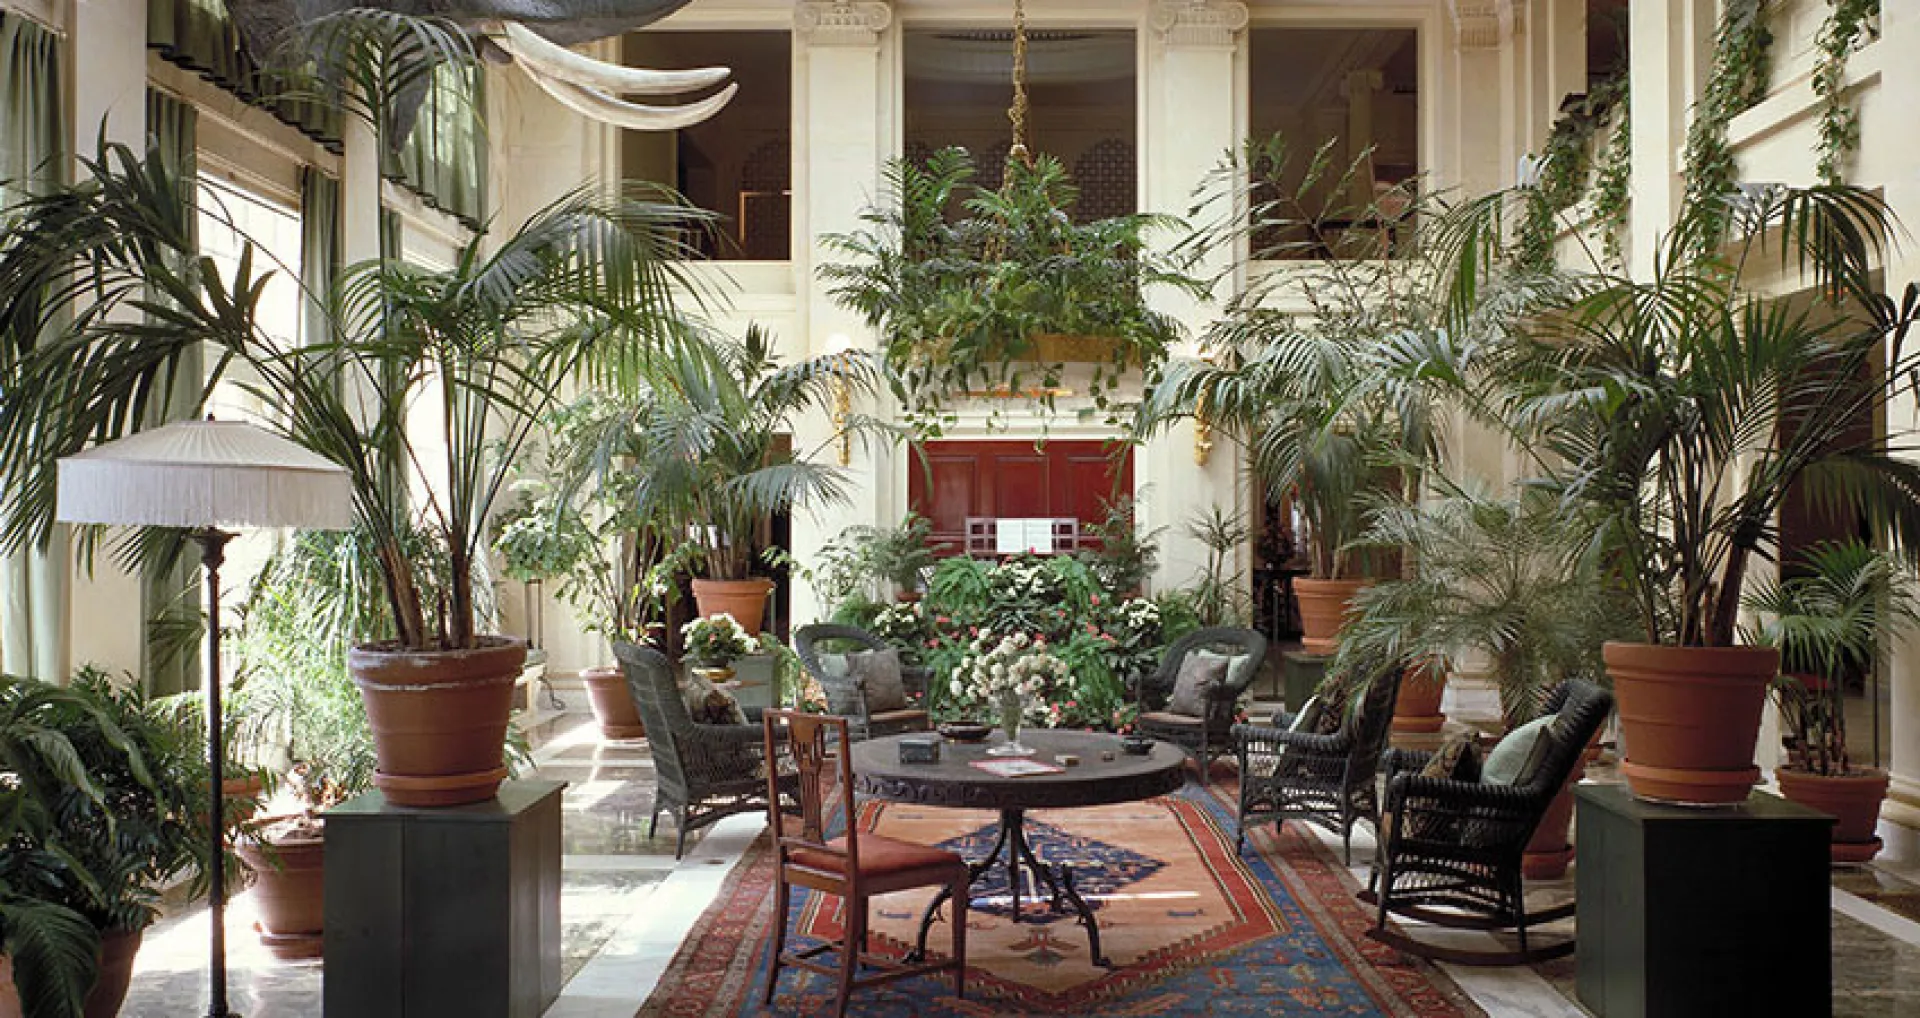 View of the Eastman Museum conservatory